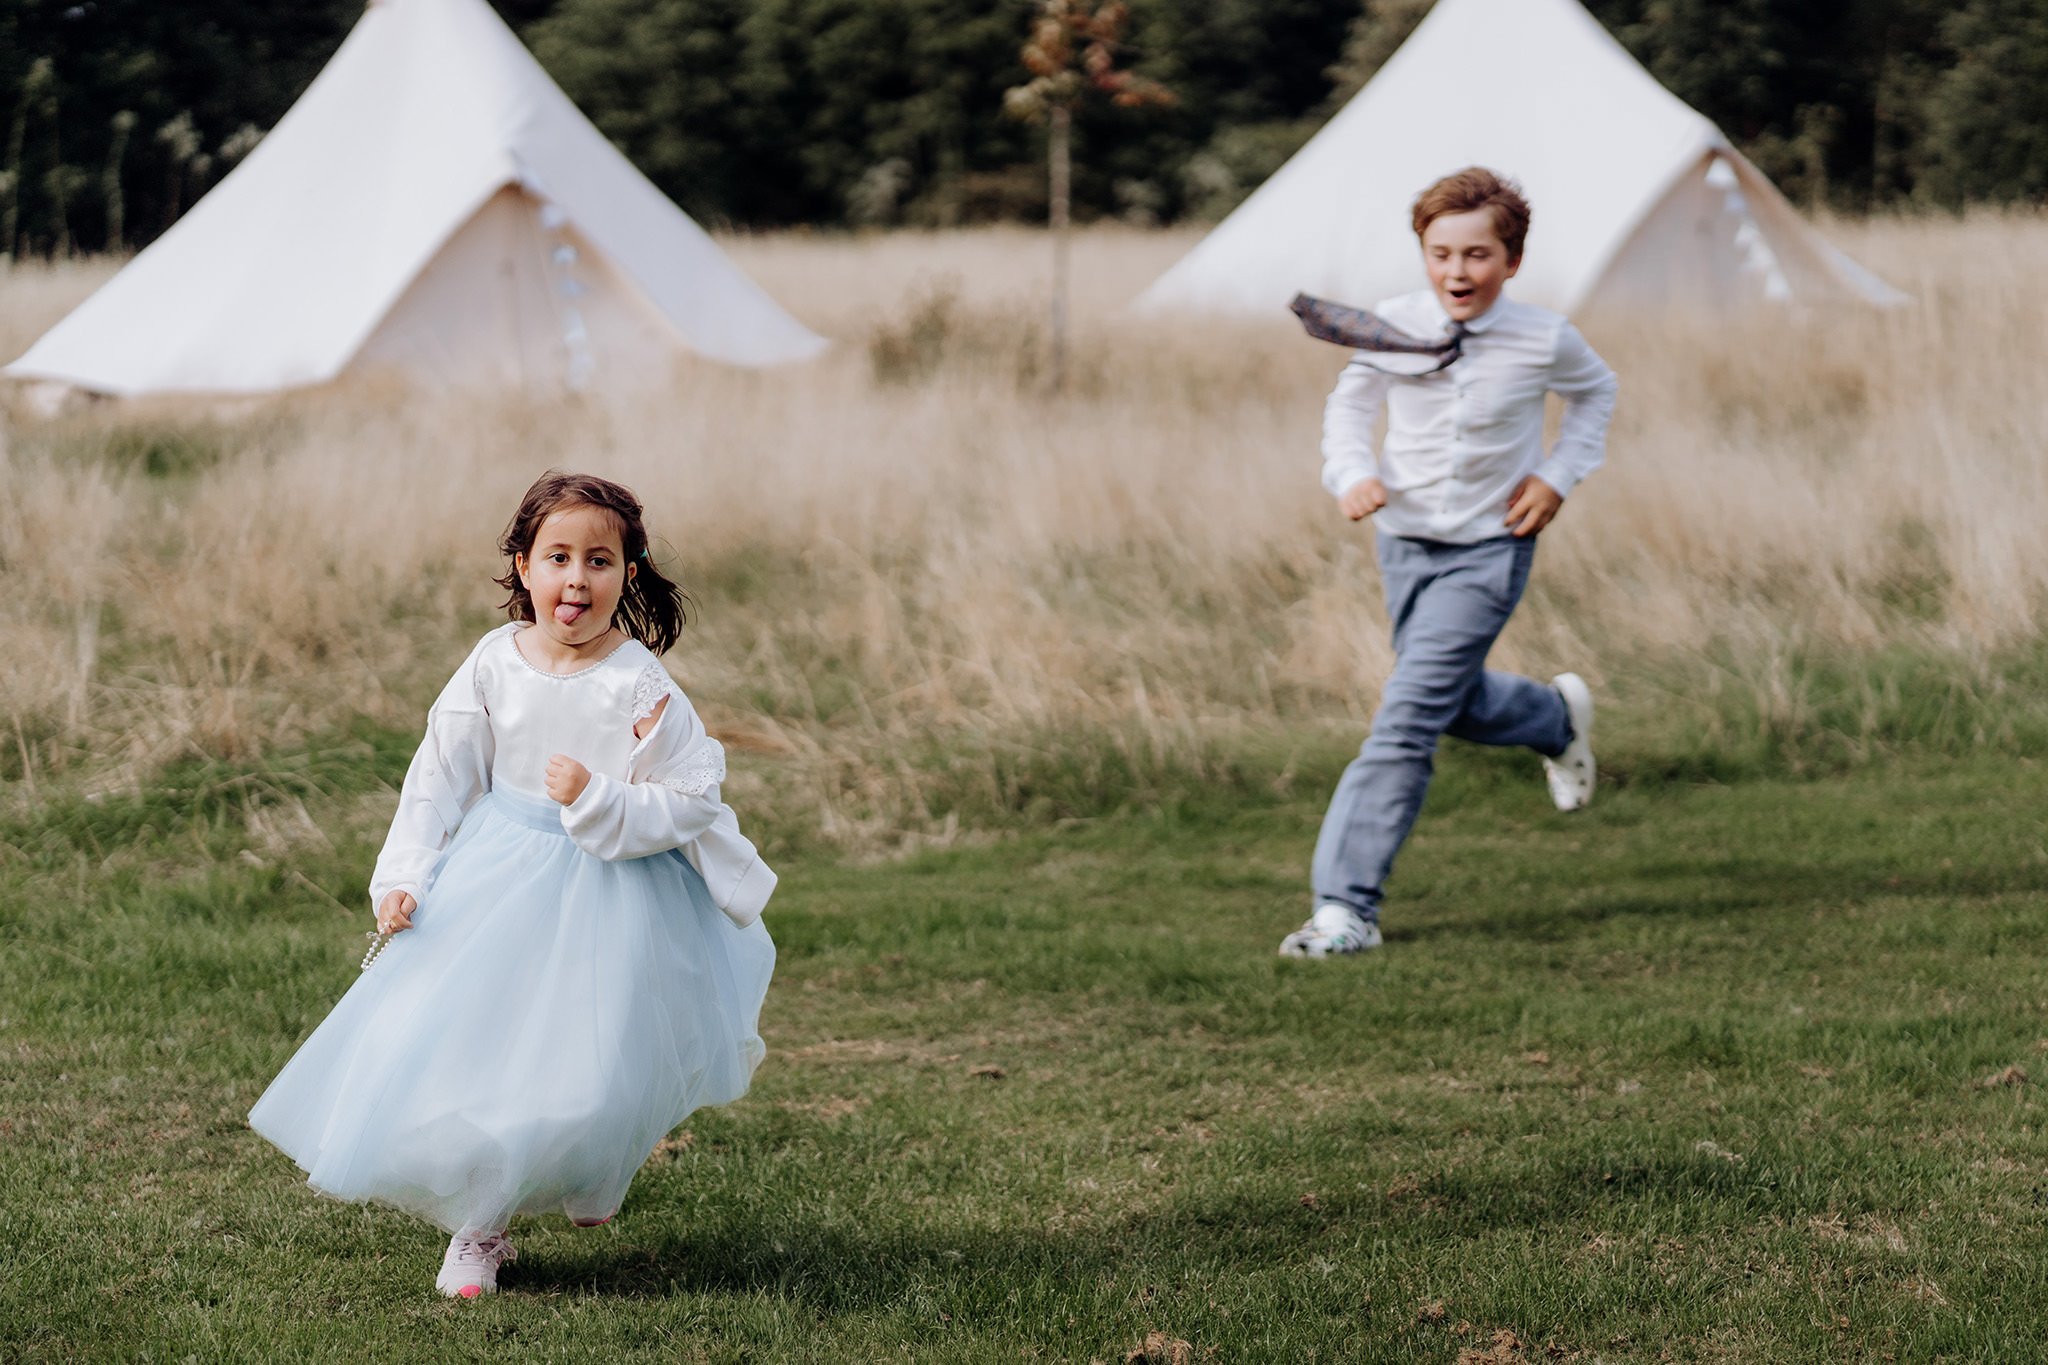 Young wedding guests chasing each other